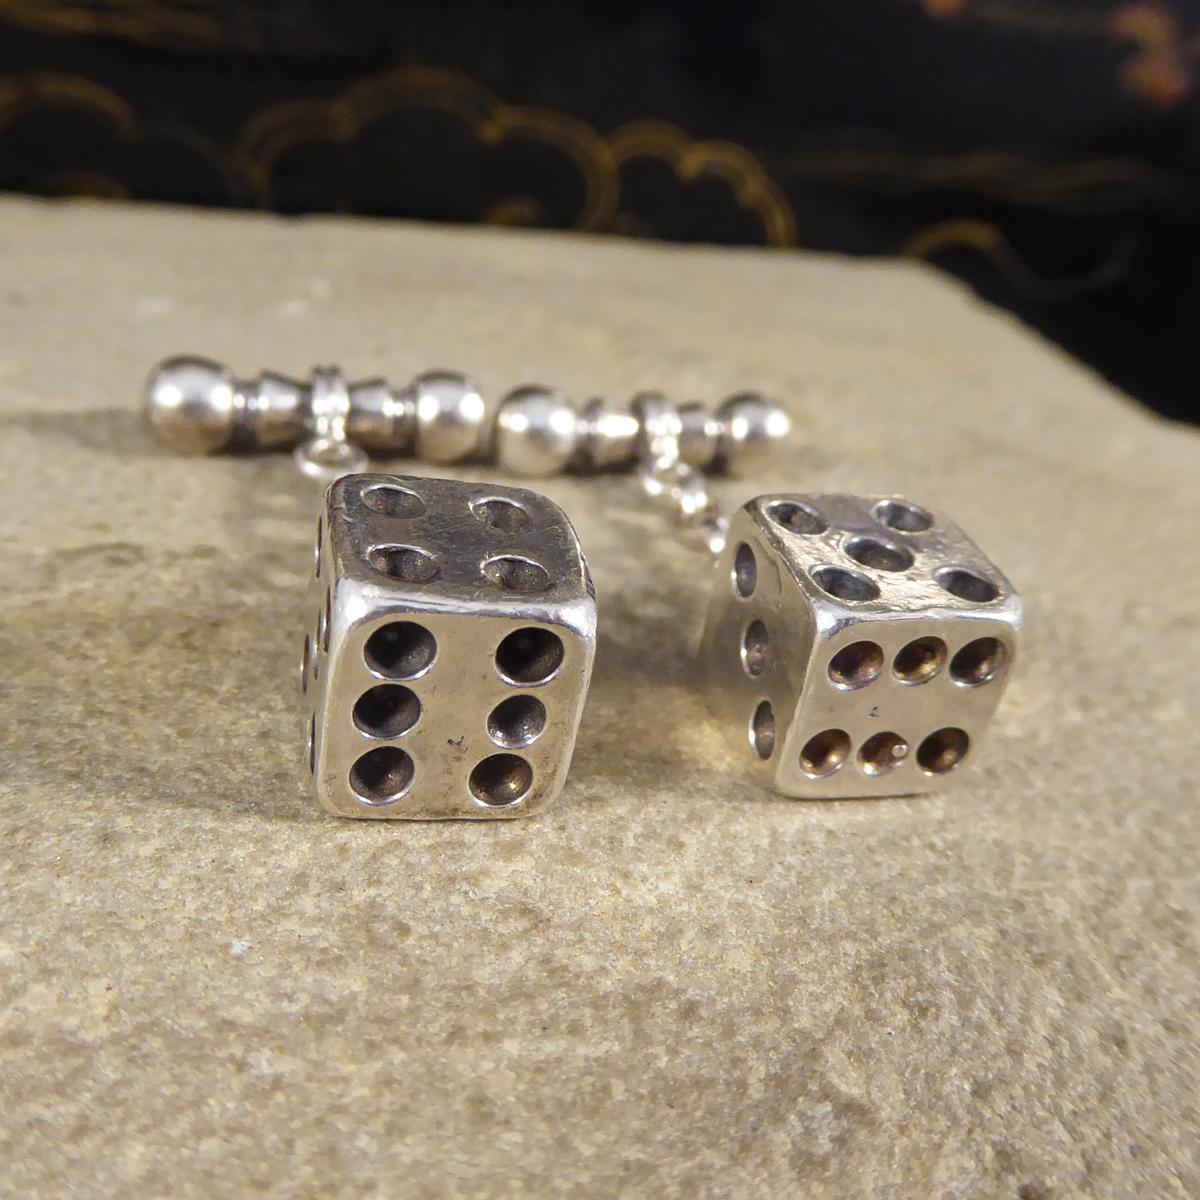 These great cufflinks have been crafted in Solid Silver with a heavy quality. They have been made in the 1990's in Birmingham, England, with very clear hallmarks on the side.

Condition: Very Good, slightest signs of wear due to age and use
Defects: